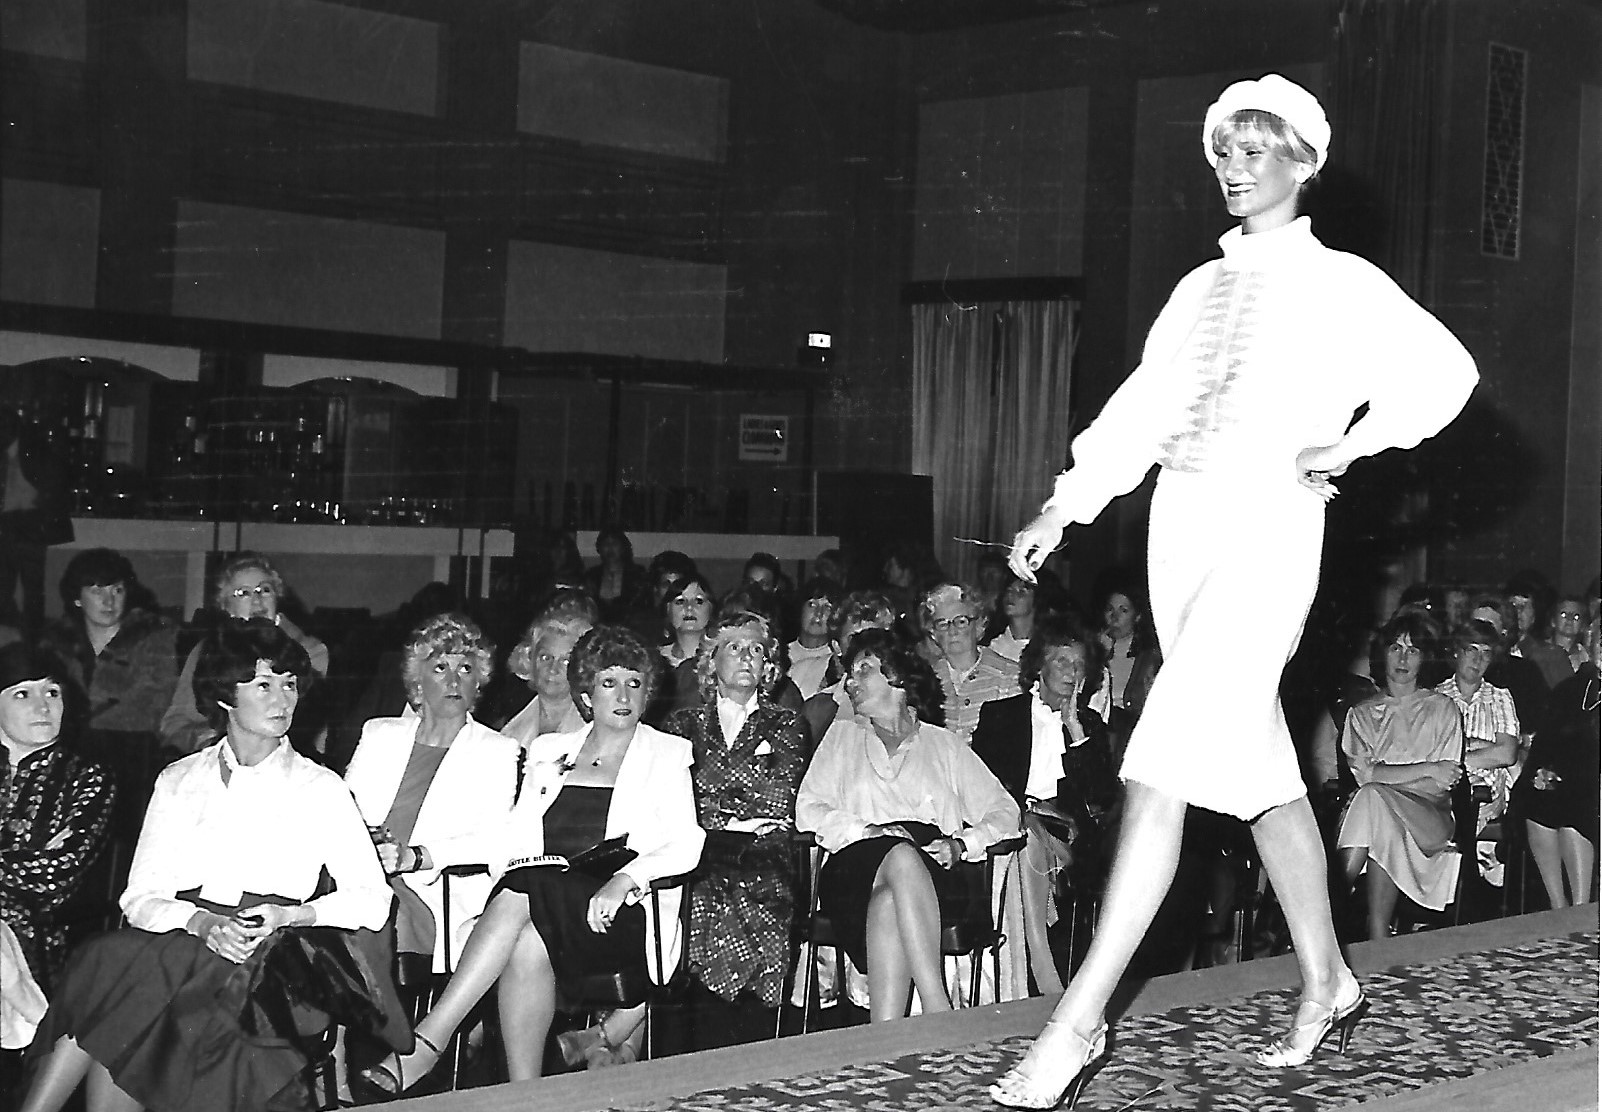 Guests enjoy a fashion show at the Floral Hall in Southport on 28th September 1981